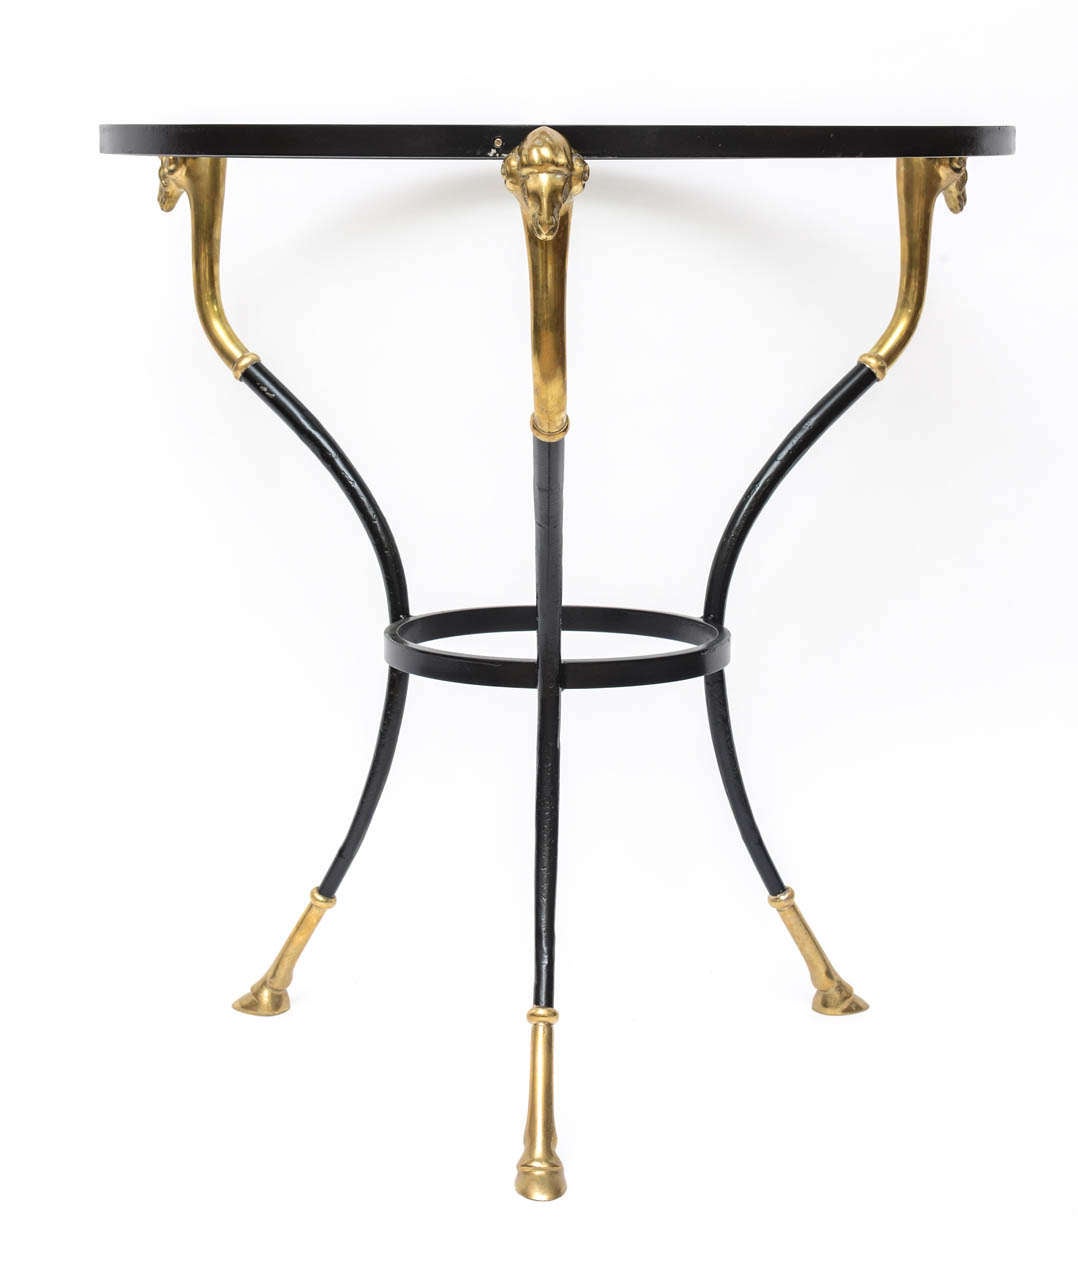 Hollywood Regency Italian Regency Glass Top Table with Brass Detail For Sale